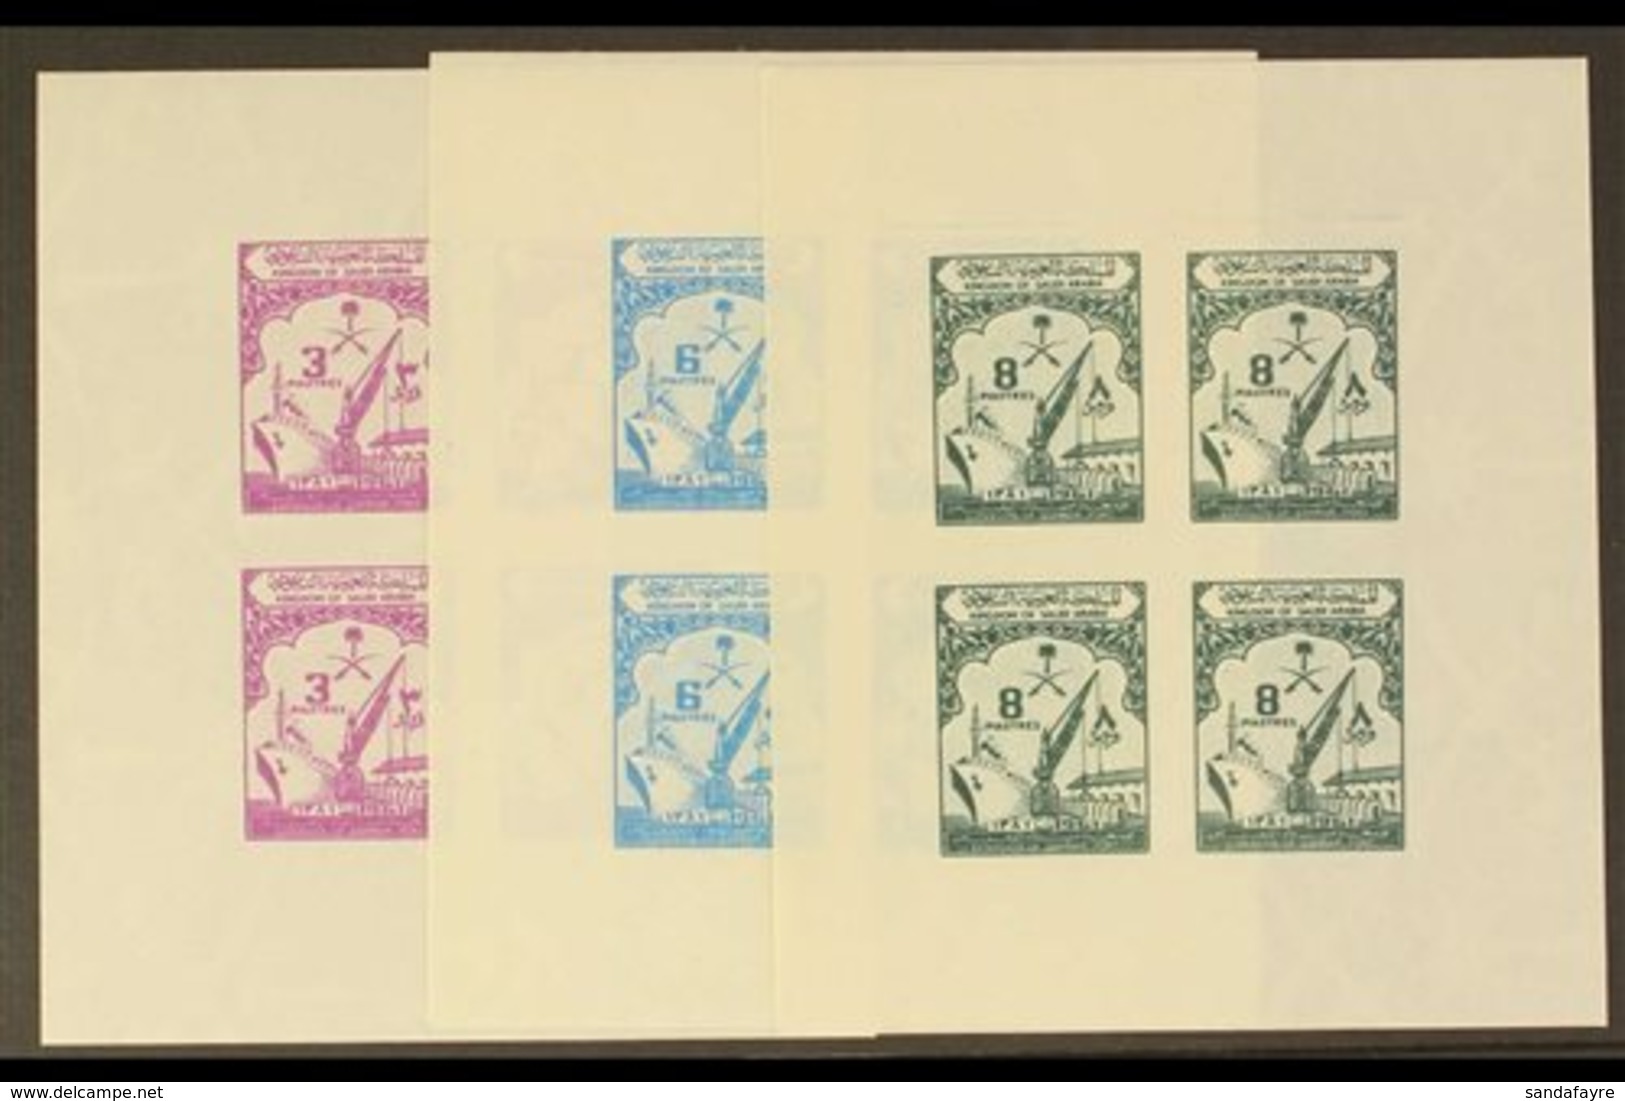 1961 1961 Opening Of Dammam Port Extension Set Of Three As IMPERFORATE MINIATURE SHEETS With Watermark Sideways And Each - Saudi Arabia